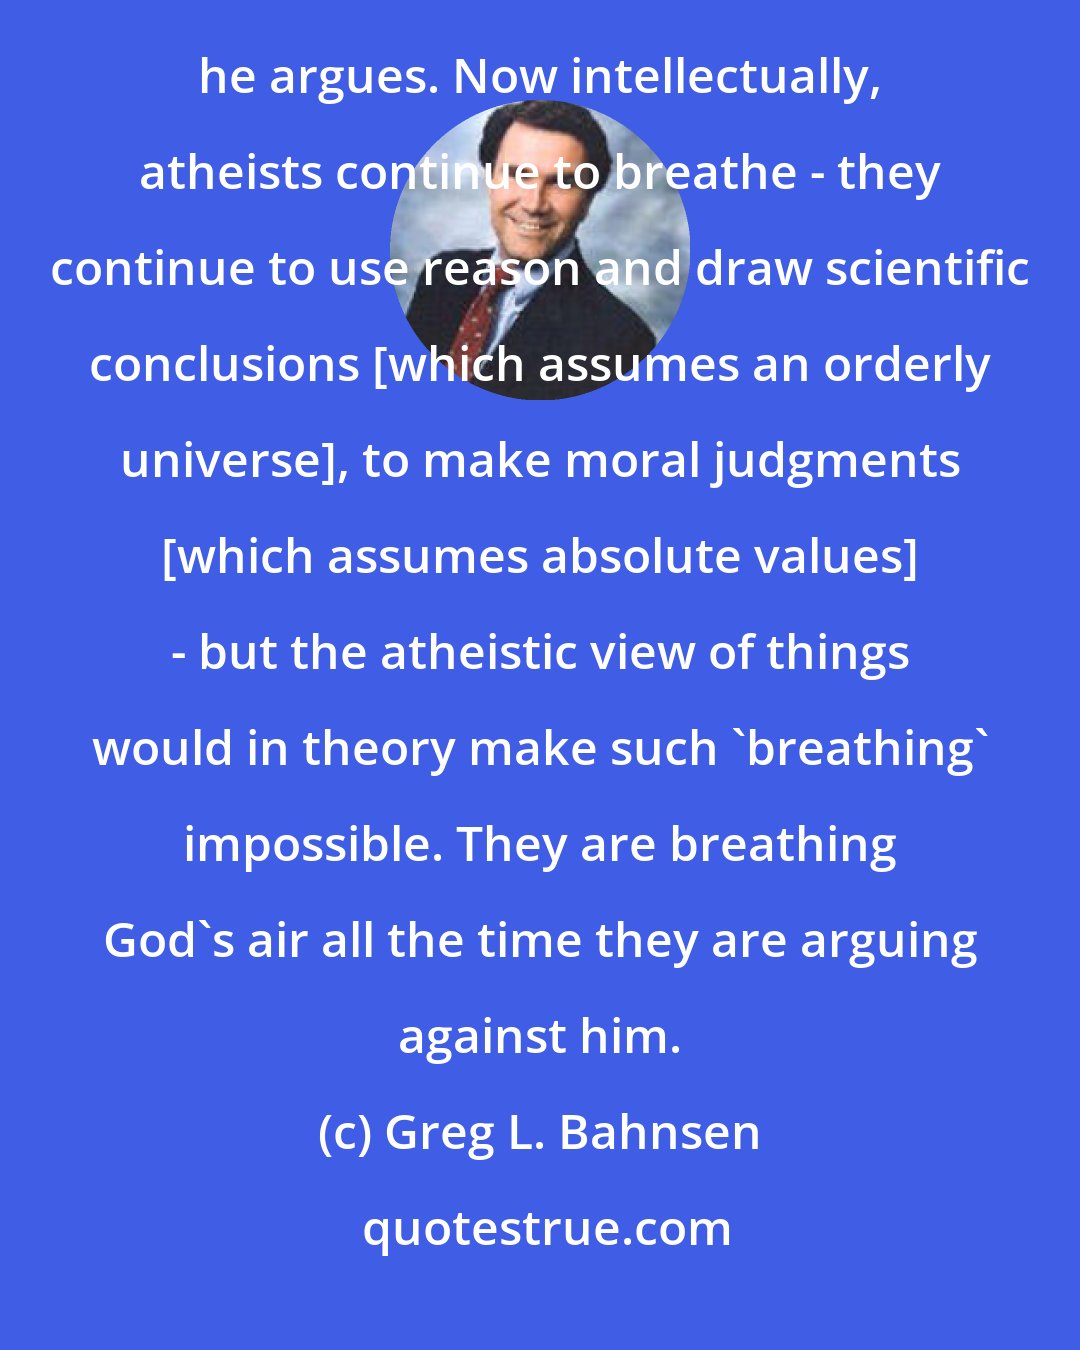 Greg L. Bahnsen: Imagine a person who comes in here tonight and argues 'no air exists' but continues to breathe air while he argues. Now intellectually, atheists continue to breathe - they continue to use reason and draw scientific conclusions [which assumes an orderly universe], to make moral judgments [which assumes absolute values] - but the atheistic view of things would in theory make such 'breathing' impossible. They are breathing God's air all the time they are arguing against him.